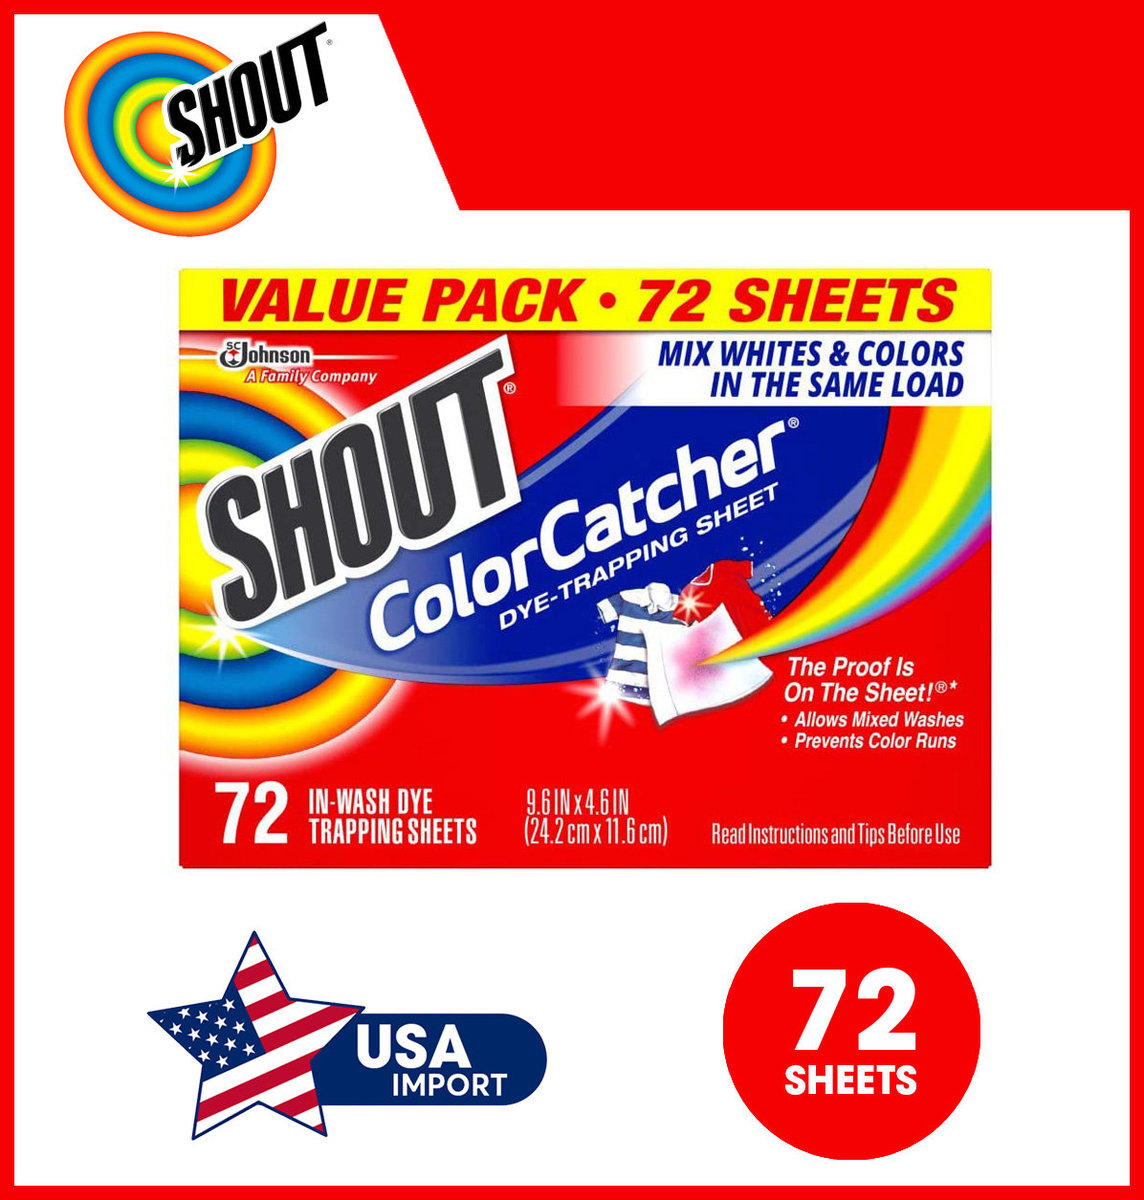 shout-color-catcher-sheets-for-laundry-dye-trapping-sheets-72-count